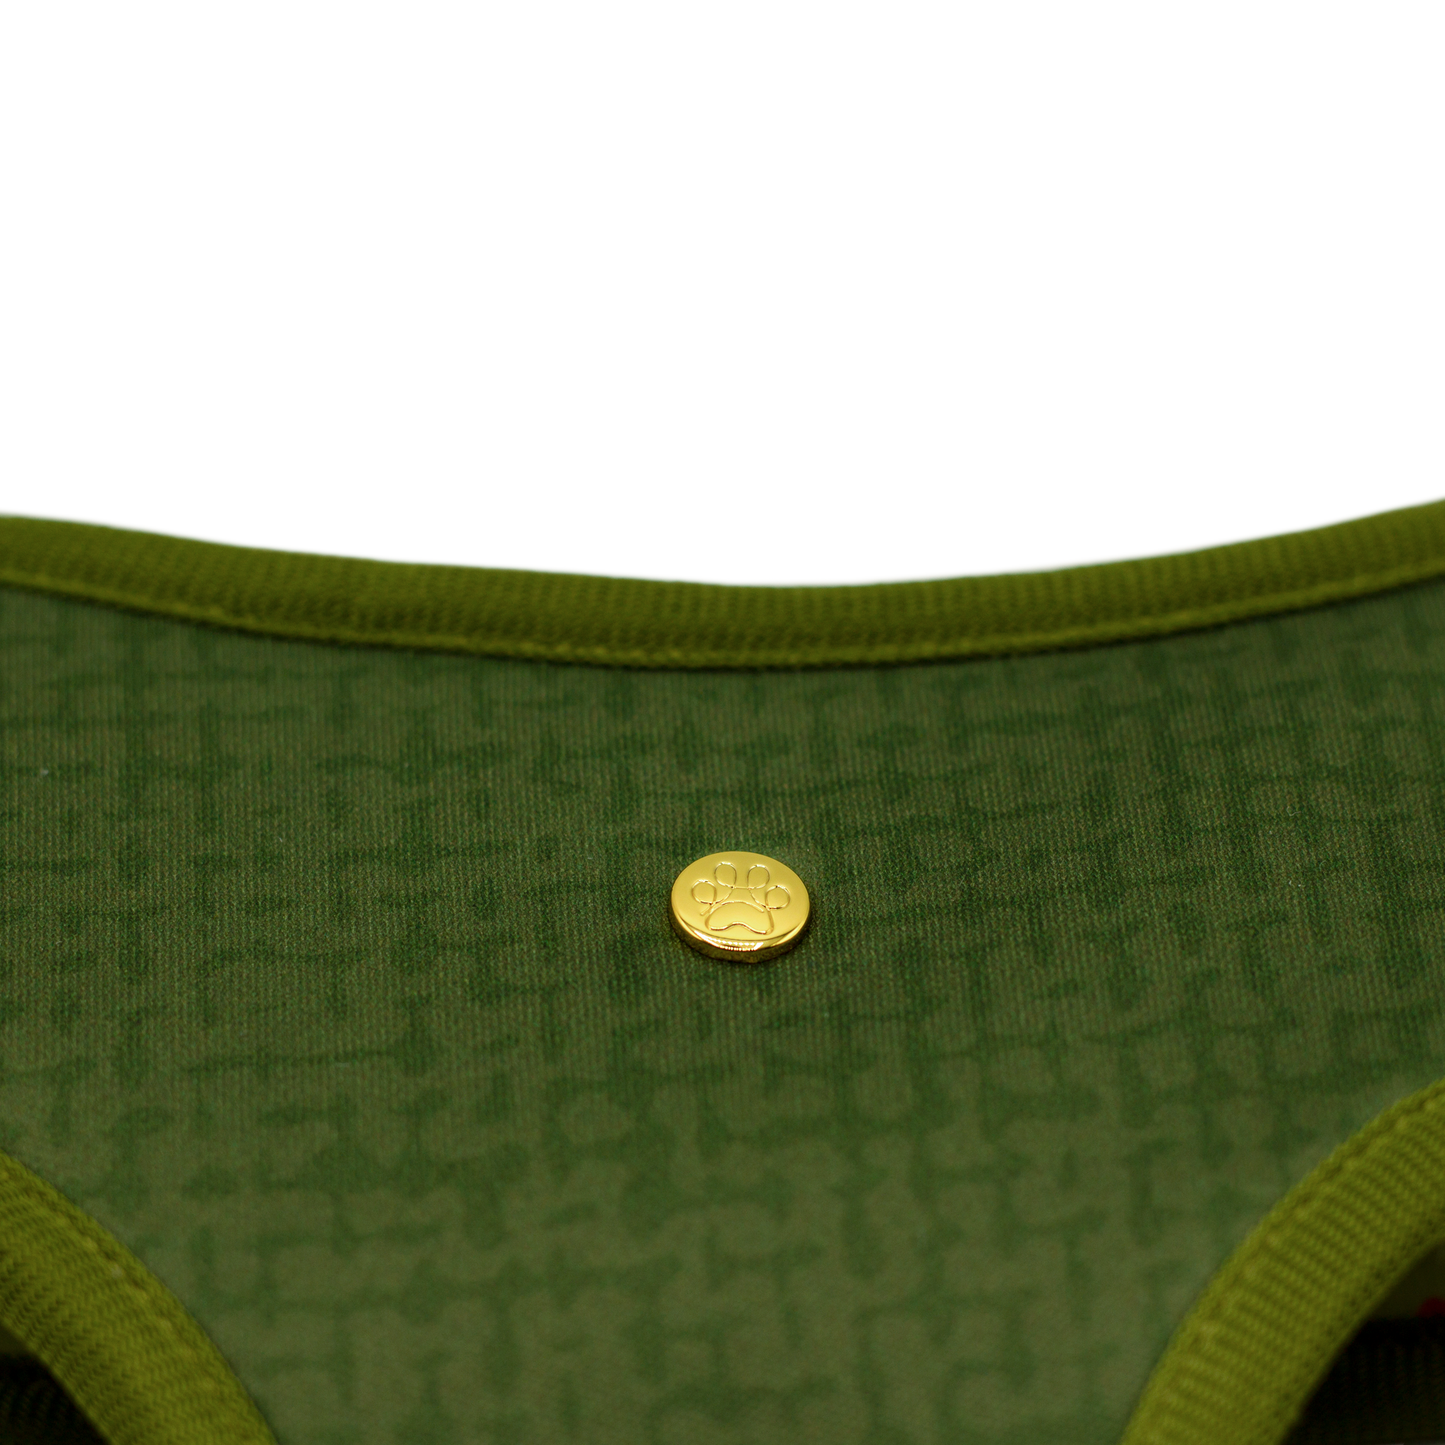 Pata Paw  alpine wildflowers reversible harness showing a close-up of its golden paw and a timeless and chic texture pattern in olive green.